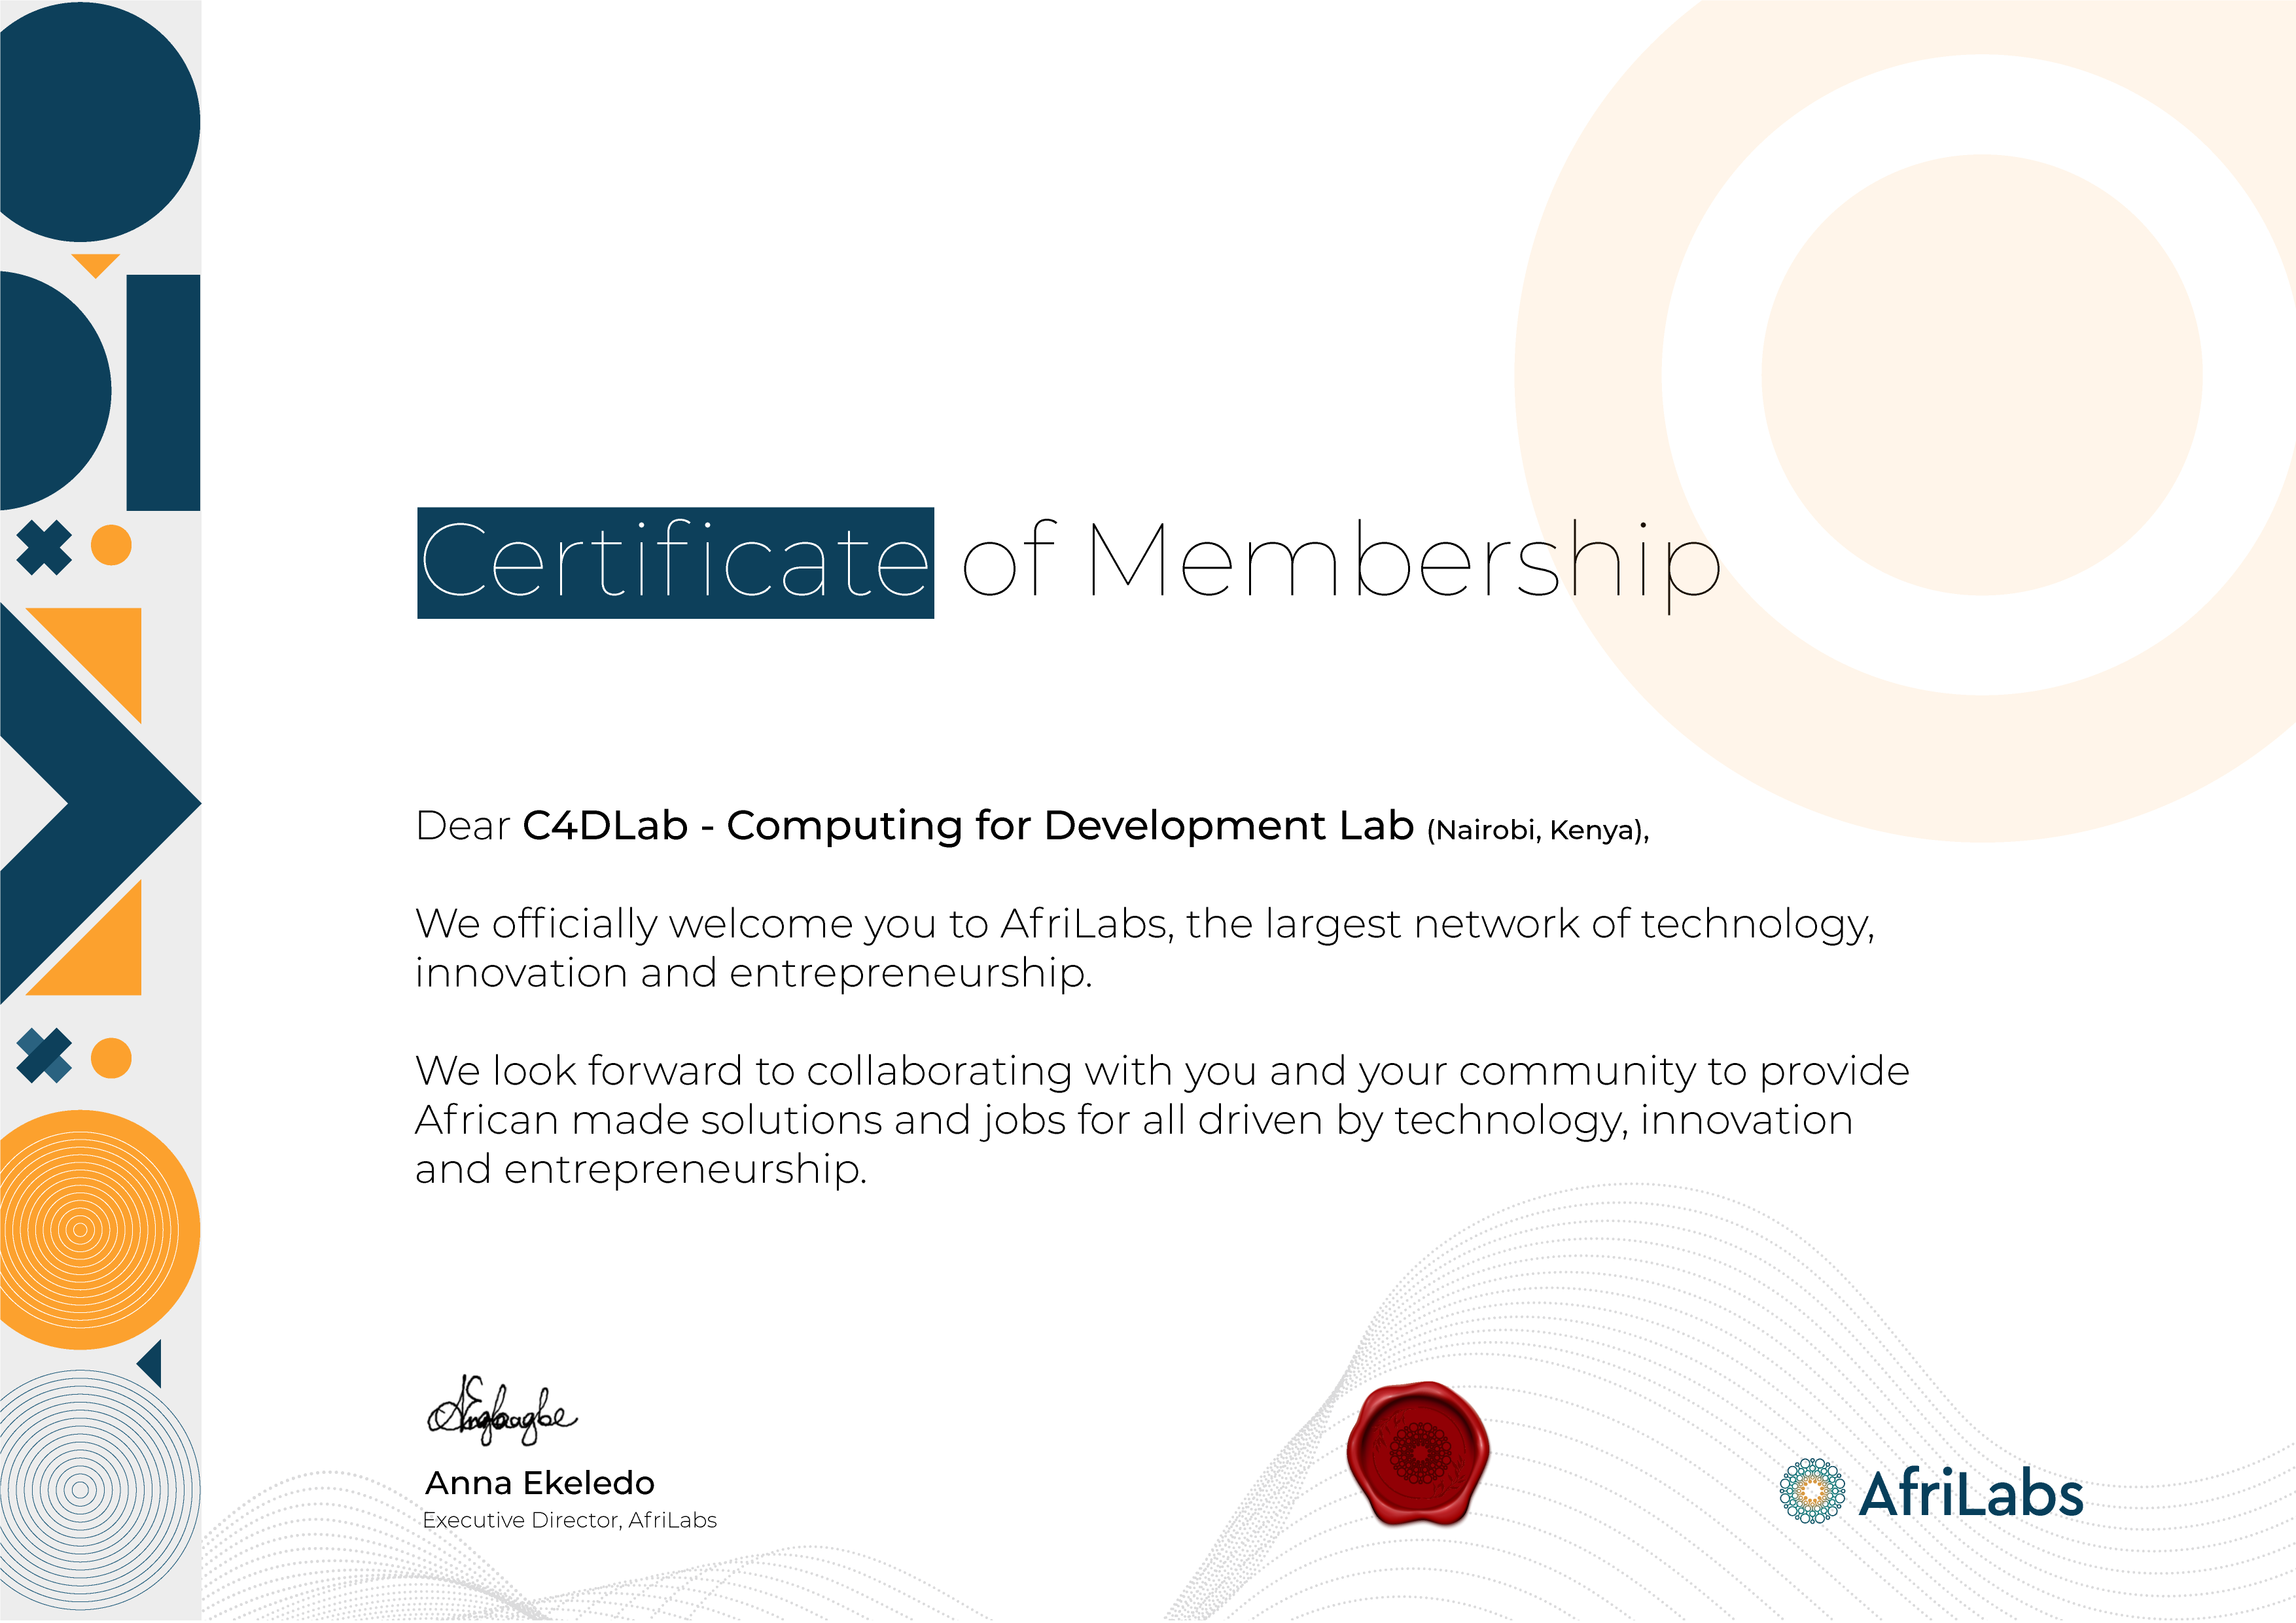 C4DLsb accepted into AfriLabs